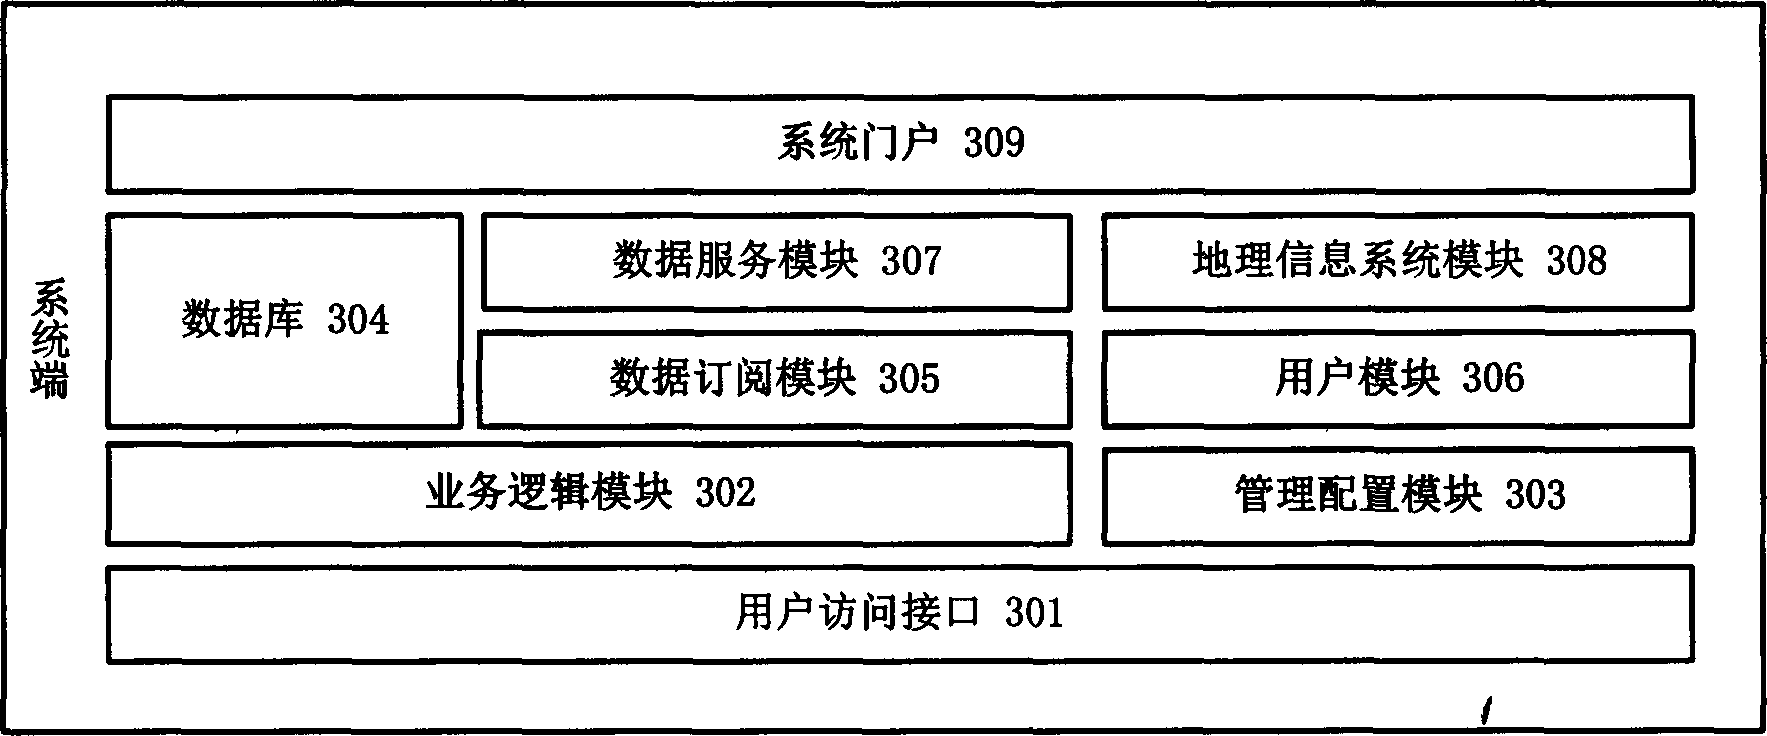 Information acquisition method based on positions